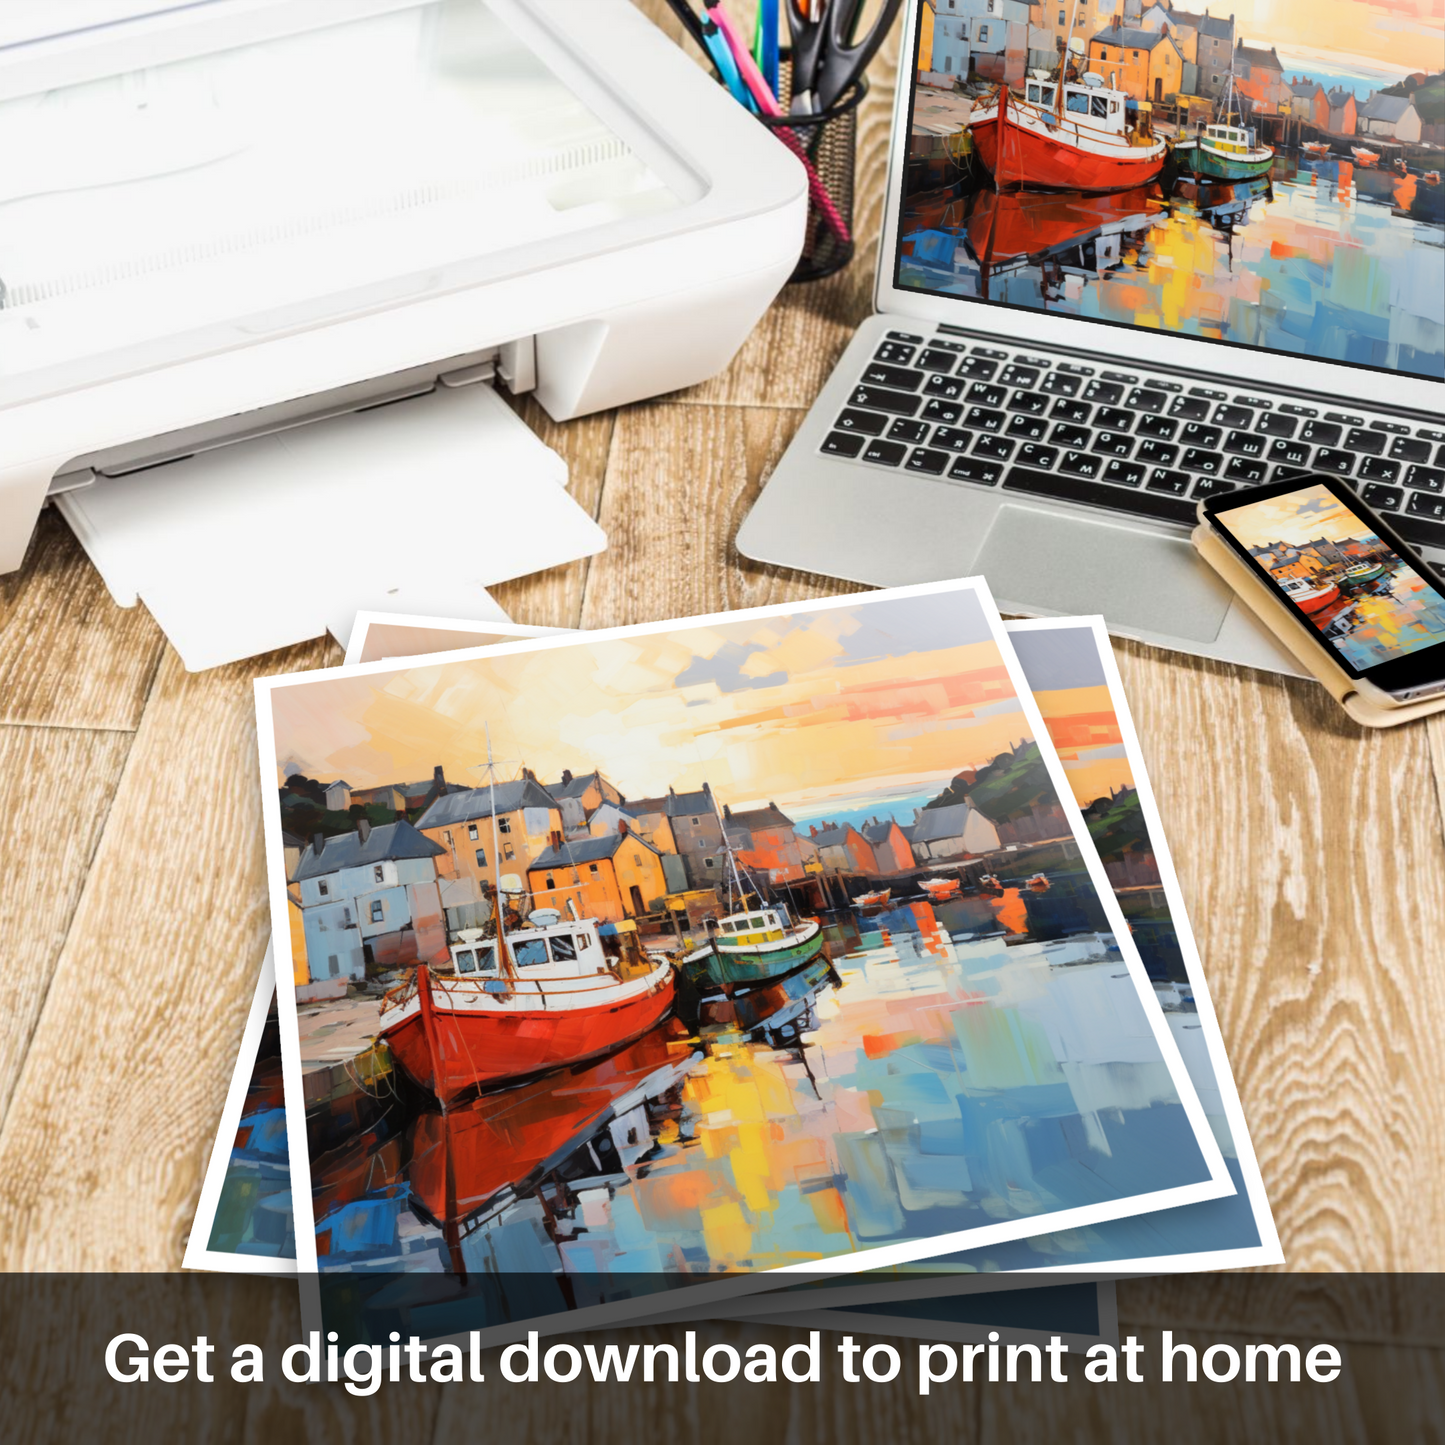 Downloadable and printable picture of Millport Harbour at golden hour